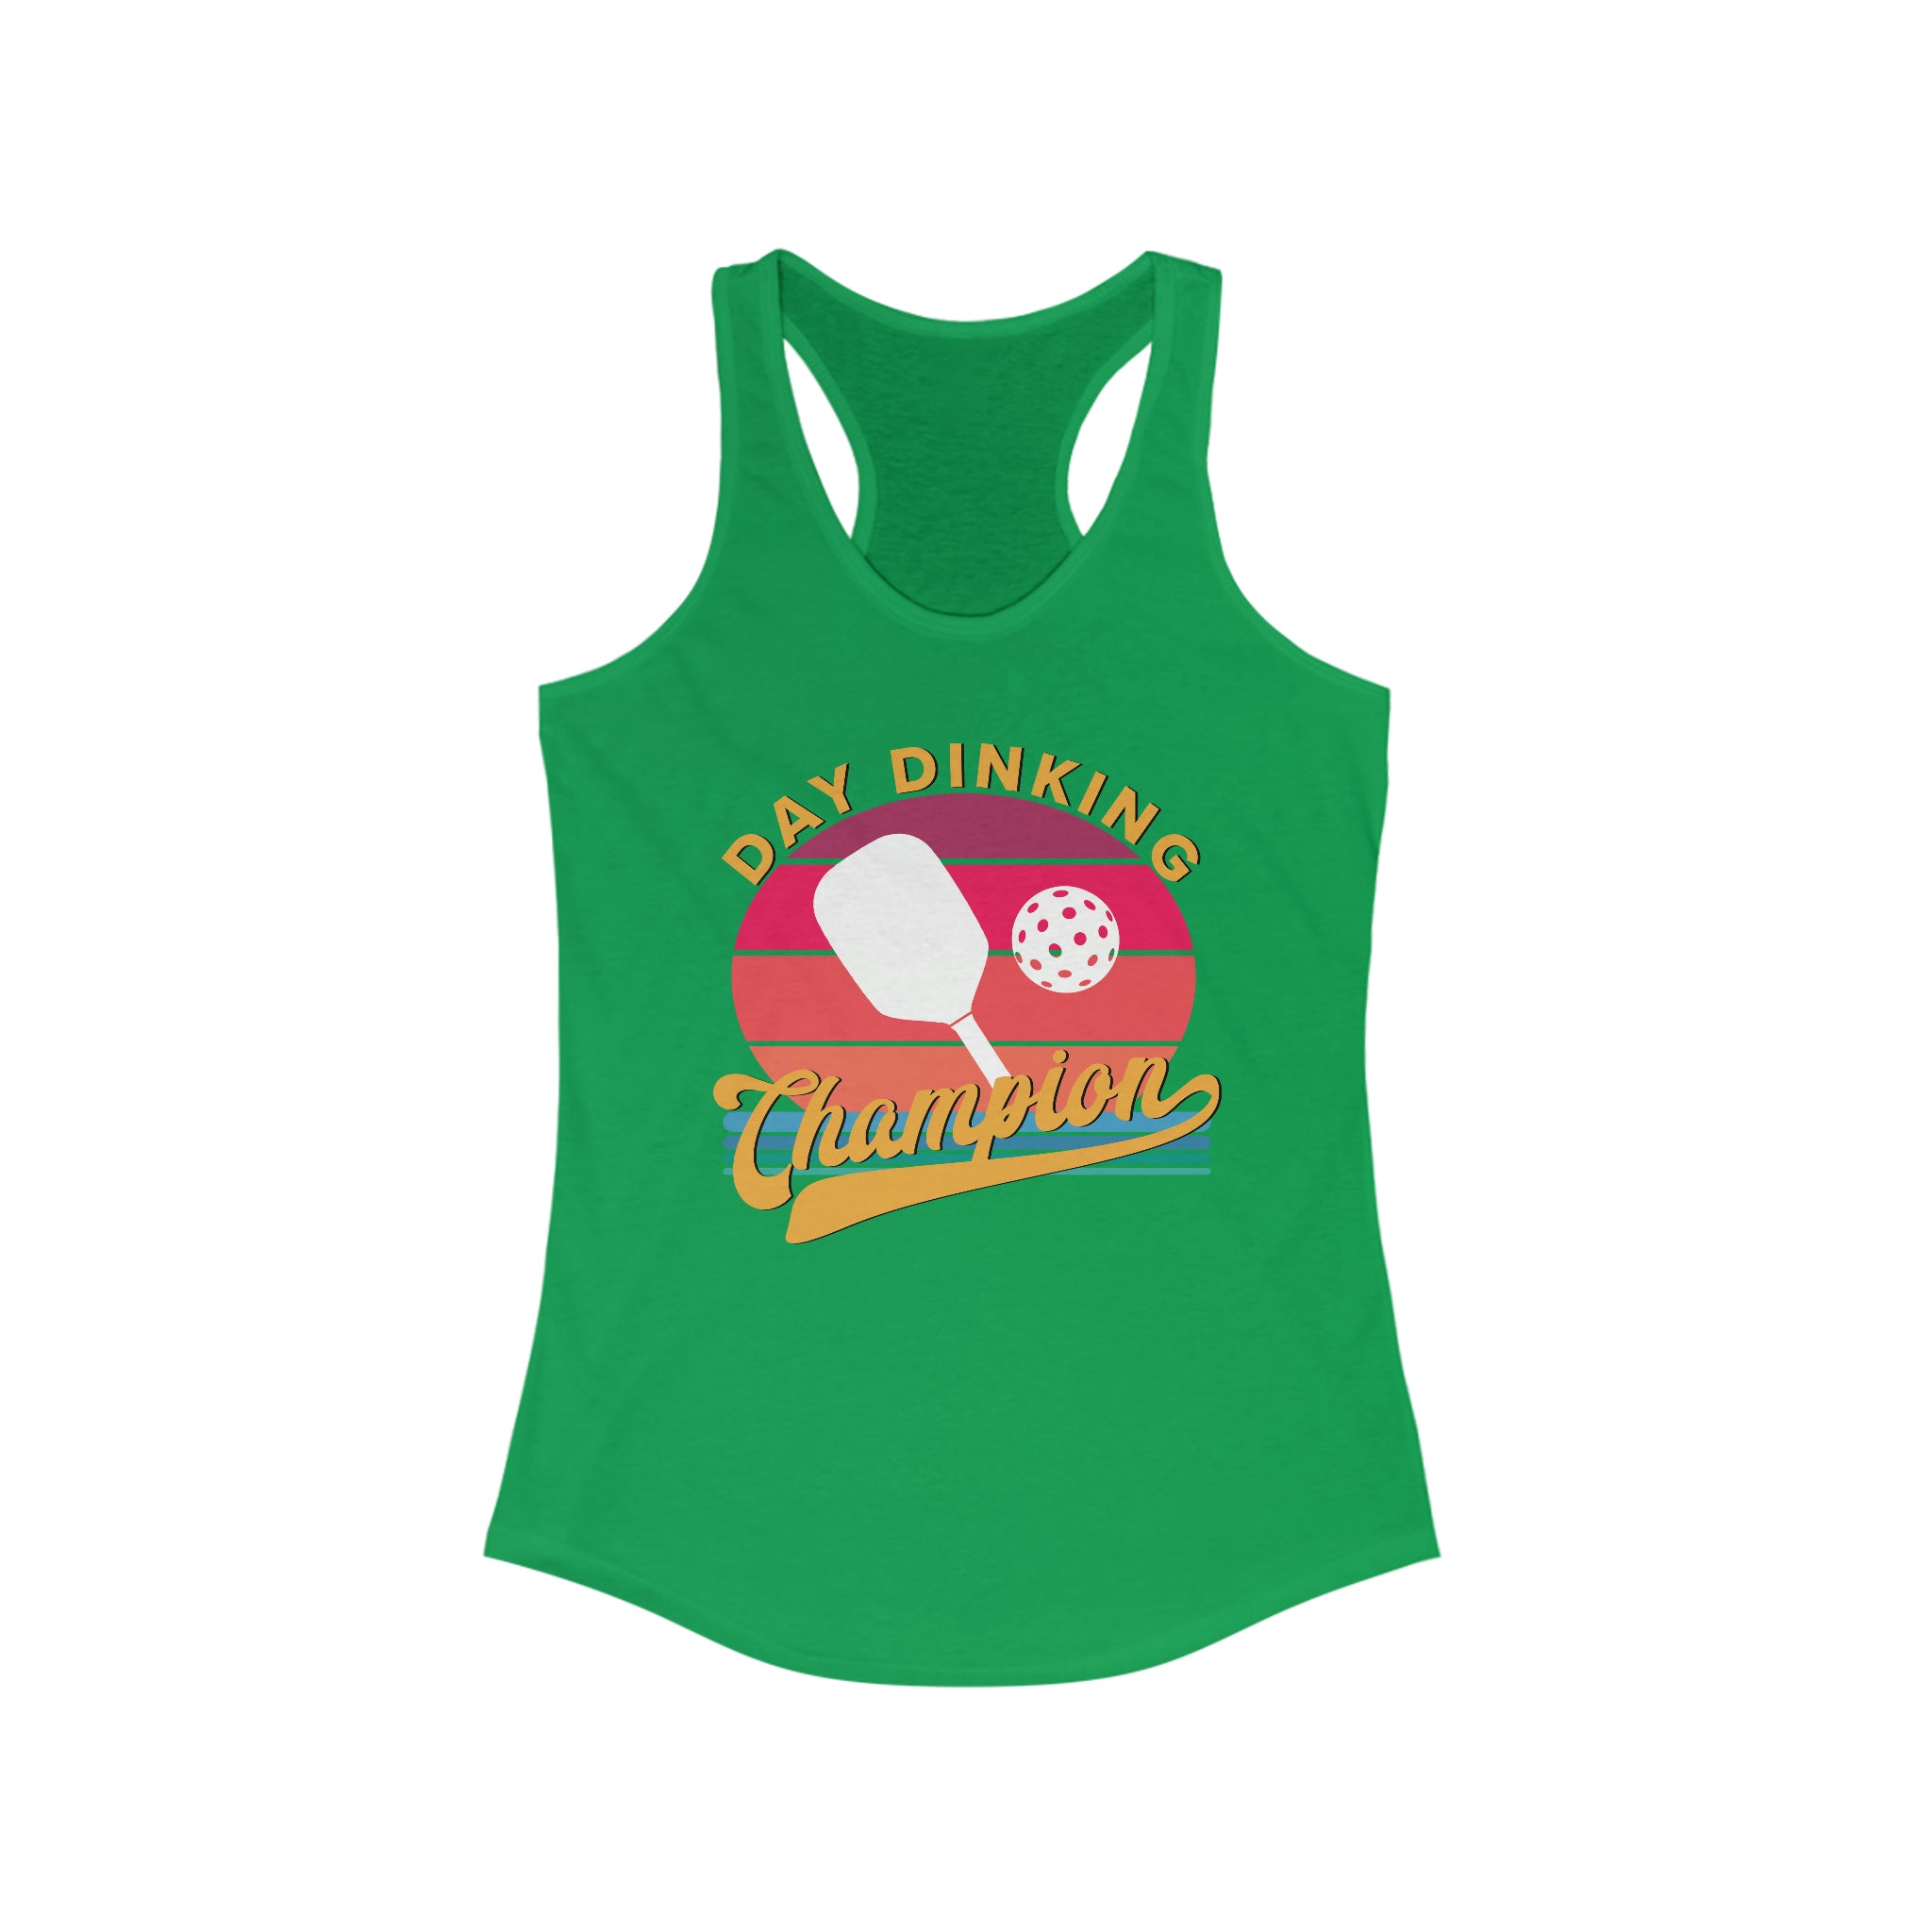 kelly green day dinking champion retro inspired pickleball apparel women's racerback tank top front view